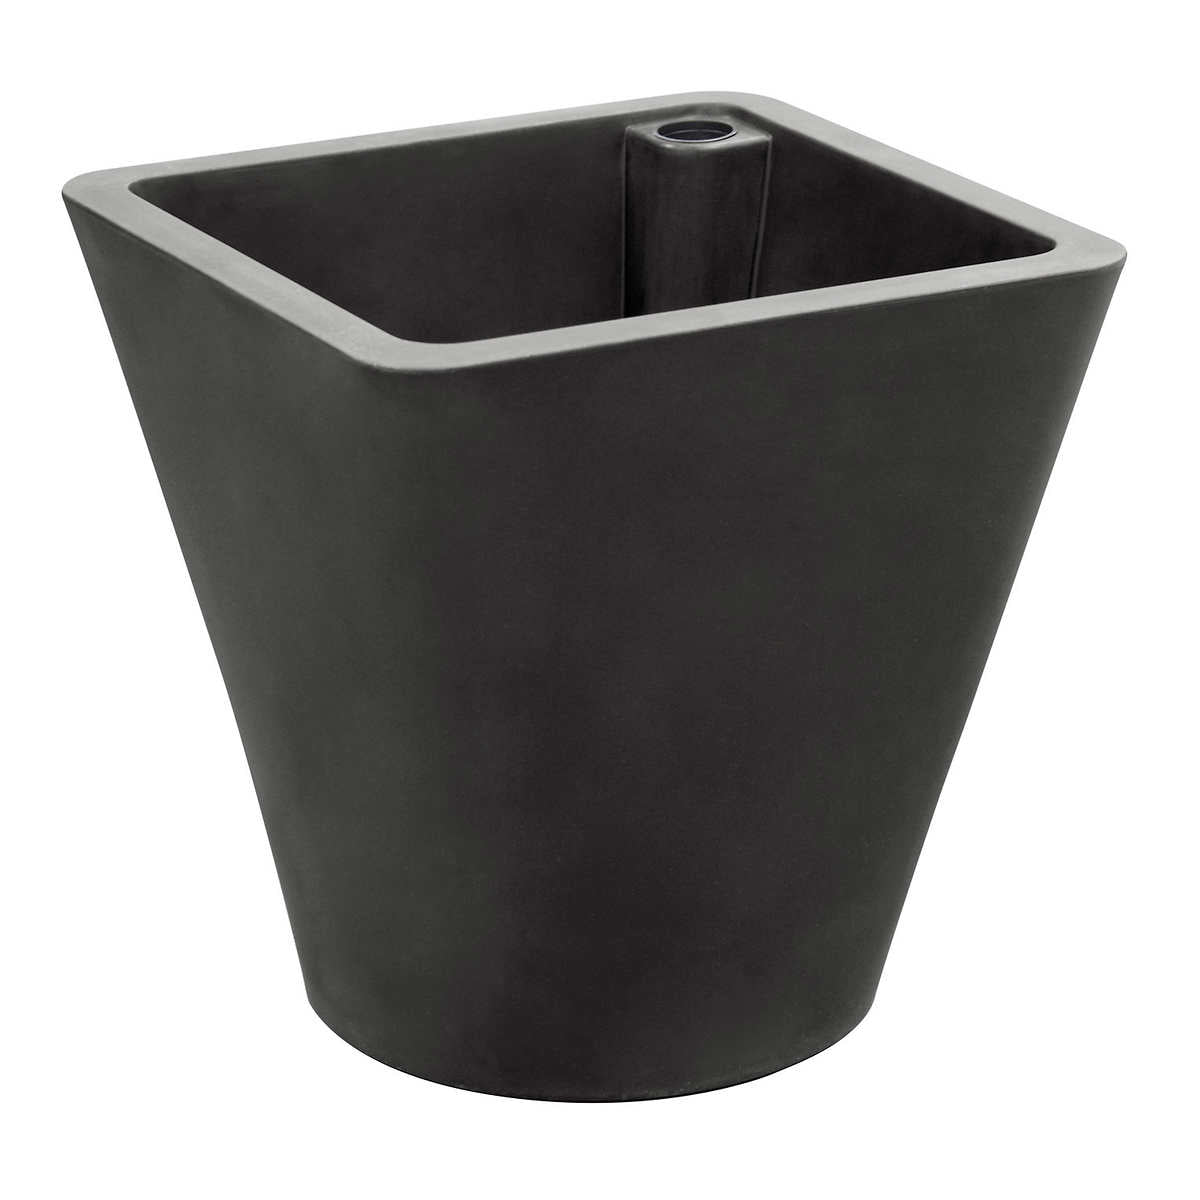 Contour 20 50.8 cm (20 in.) Self-Watering Planter, 2-pack